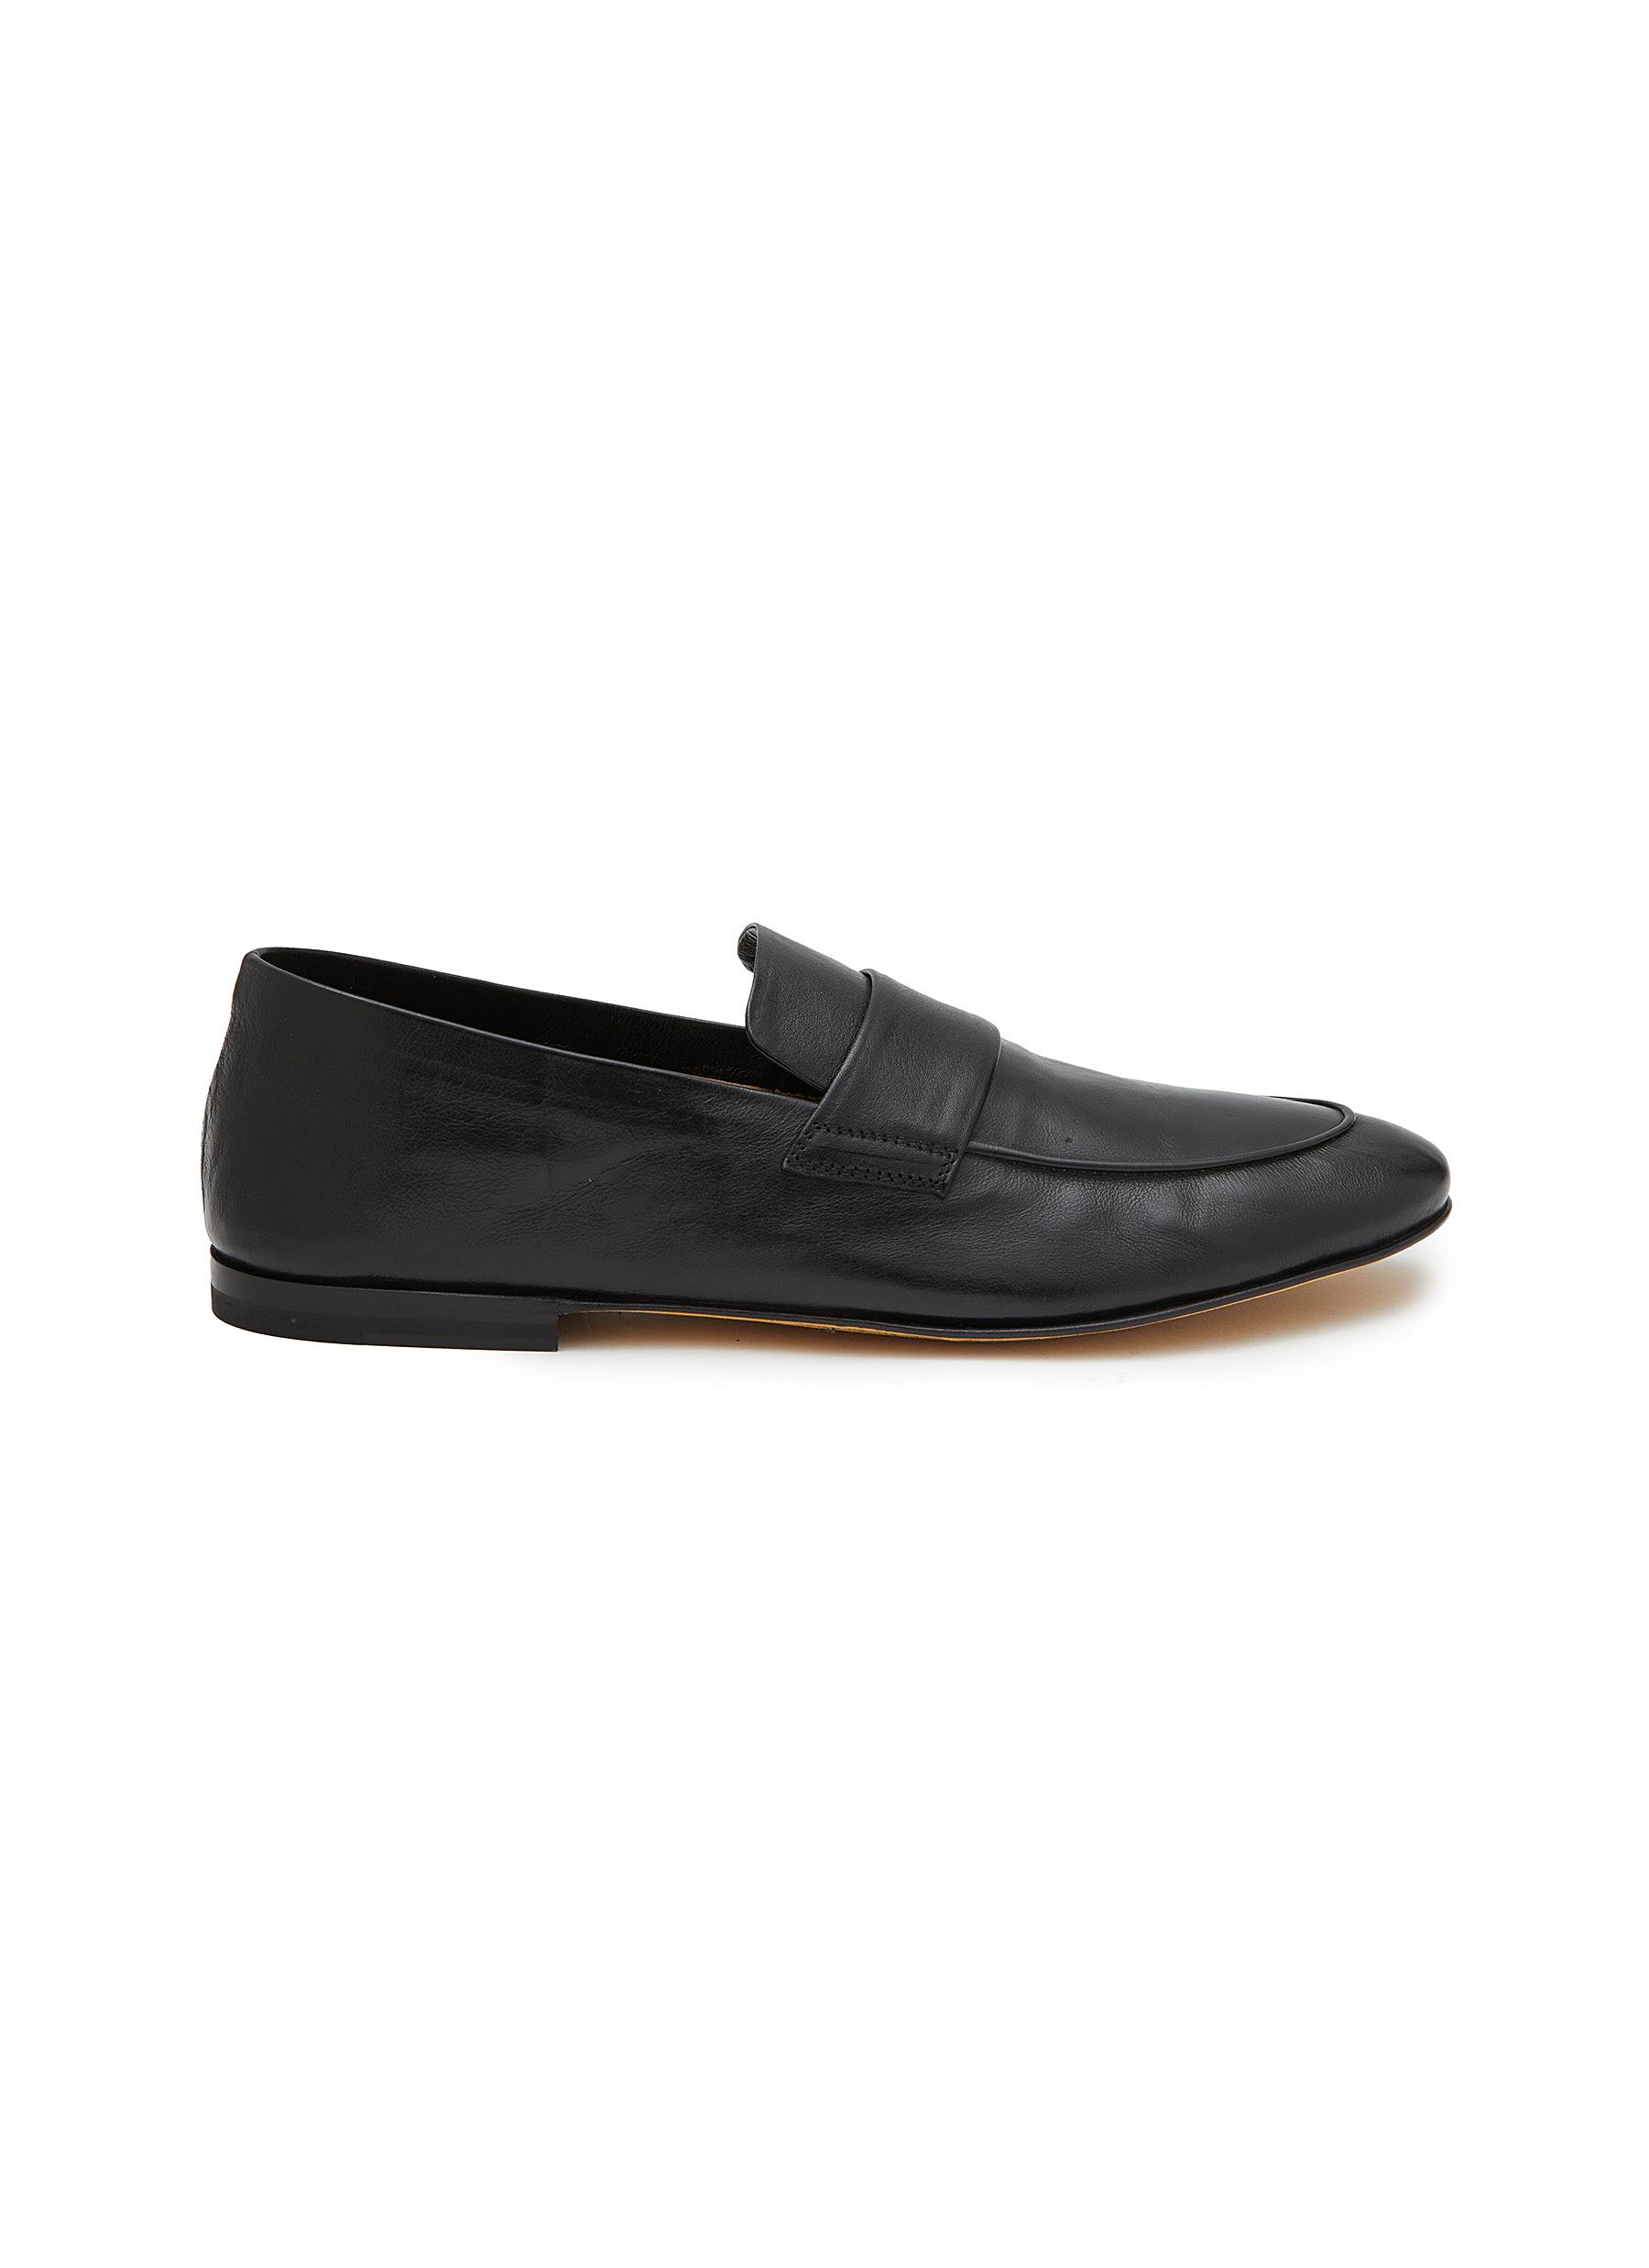 Airto 001 Leather Penny Loafers